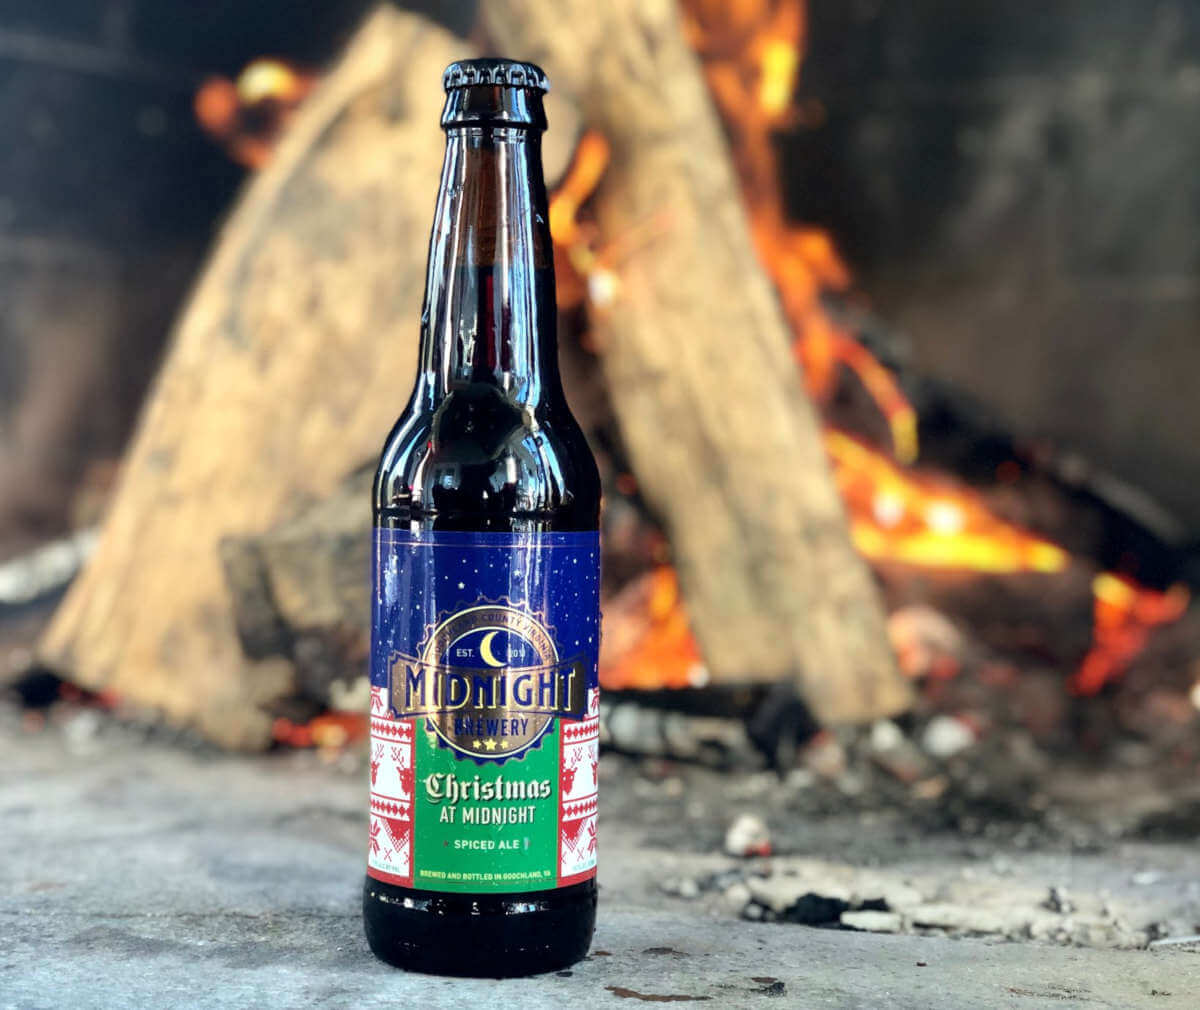 Advent Beer Calendar 2018: Day 16: Midnight Brewery Christmas at Midnight